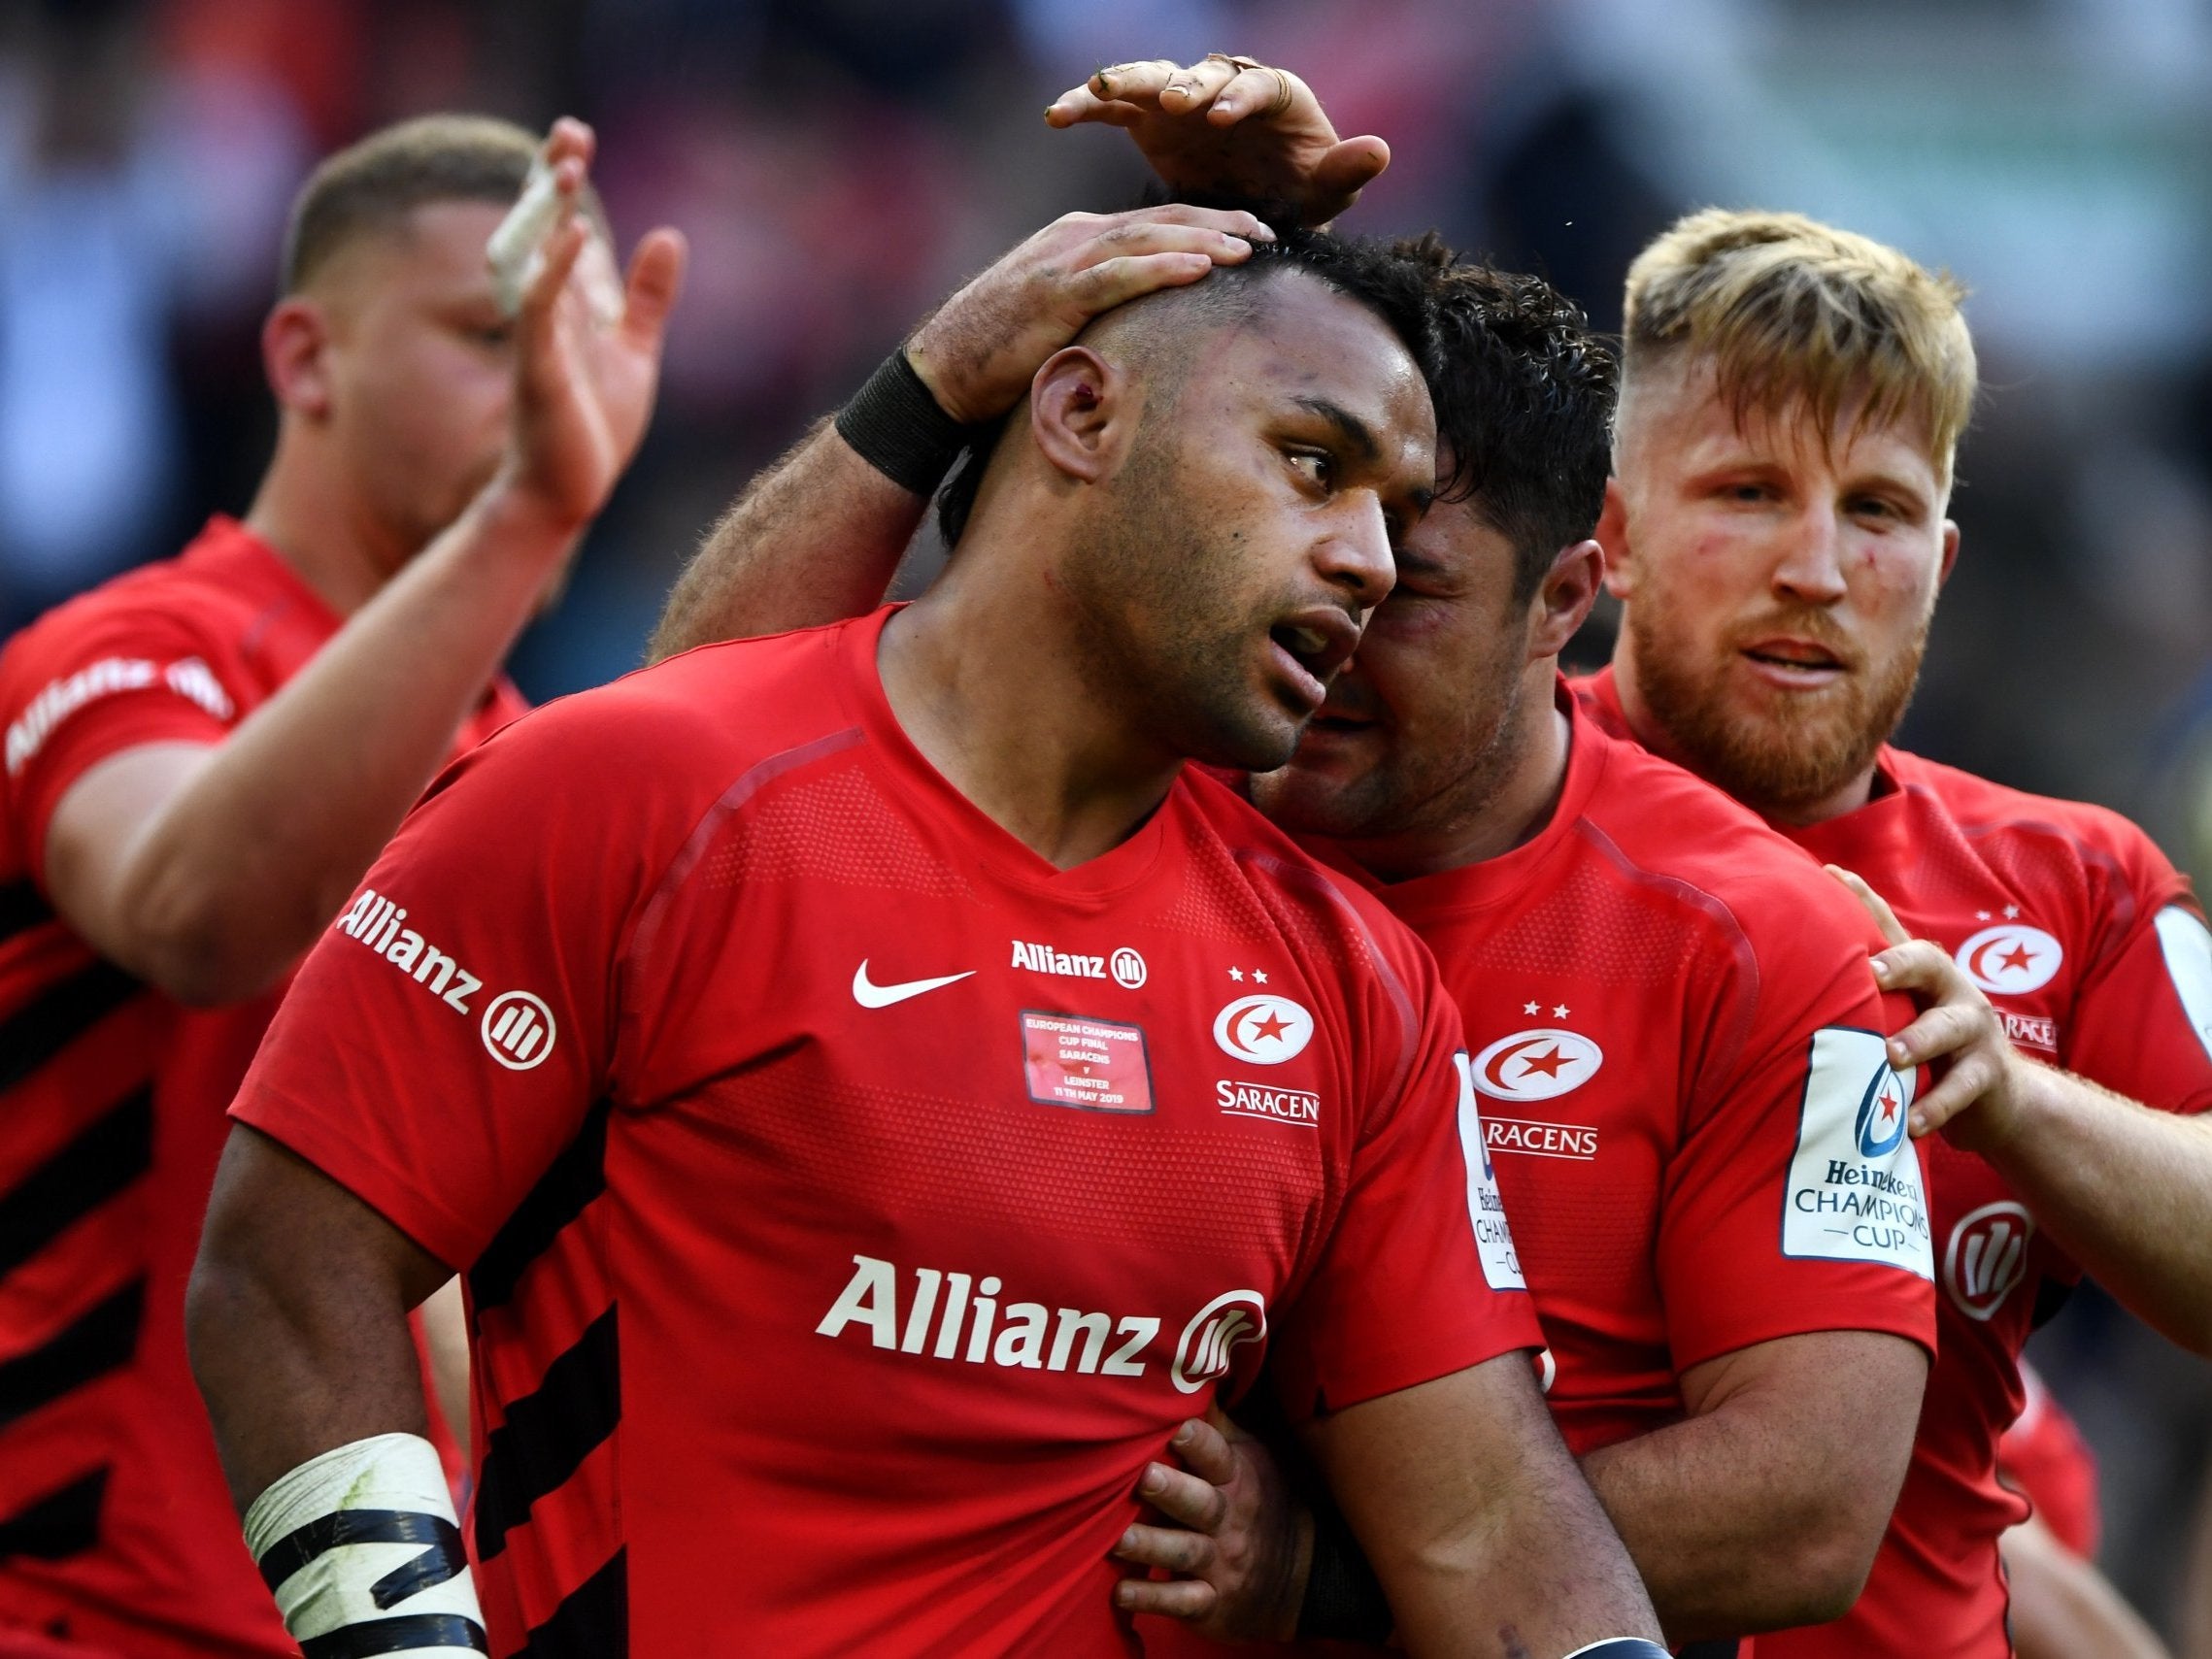 Billy Vunipola celebrates with Brad Barritt after scoring a try in Saracens' victory over Leinster